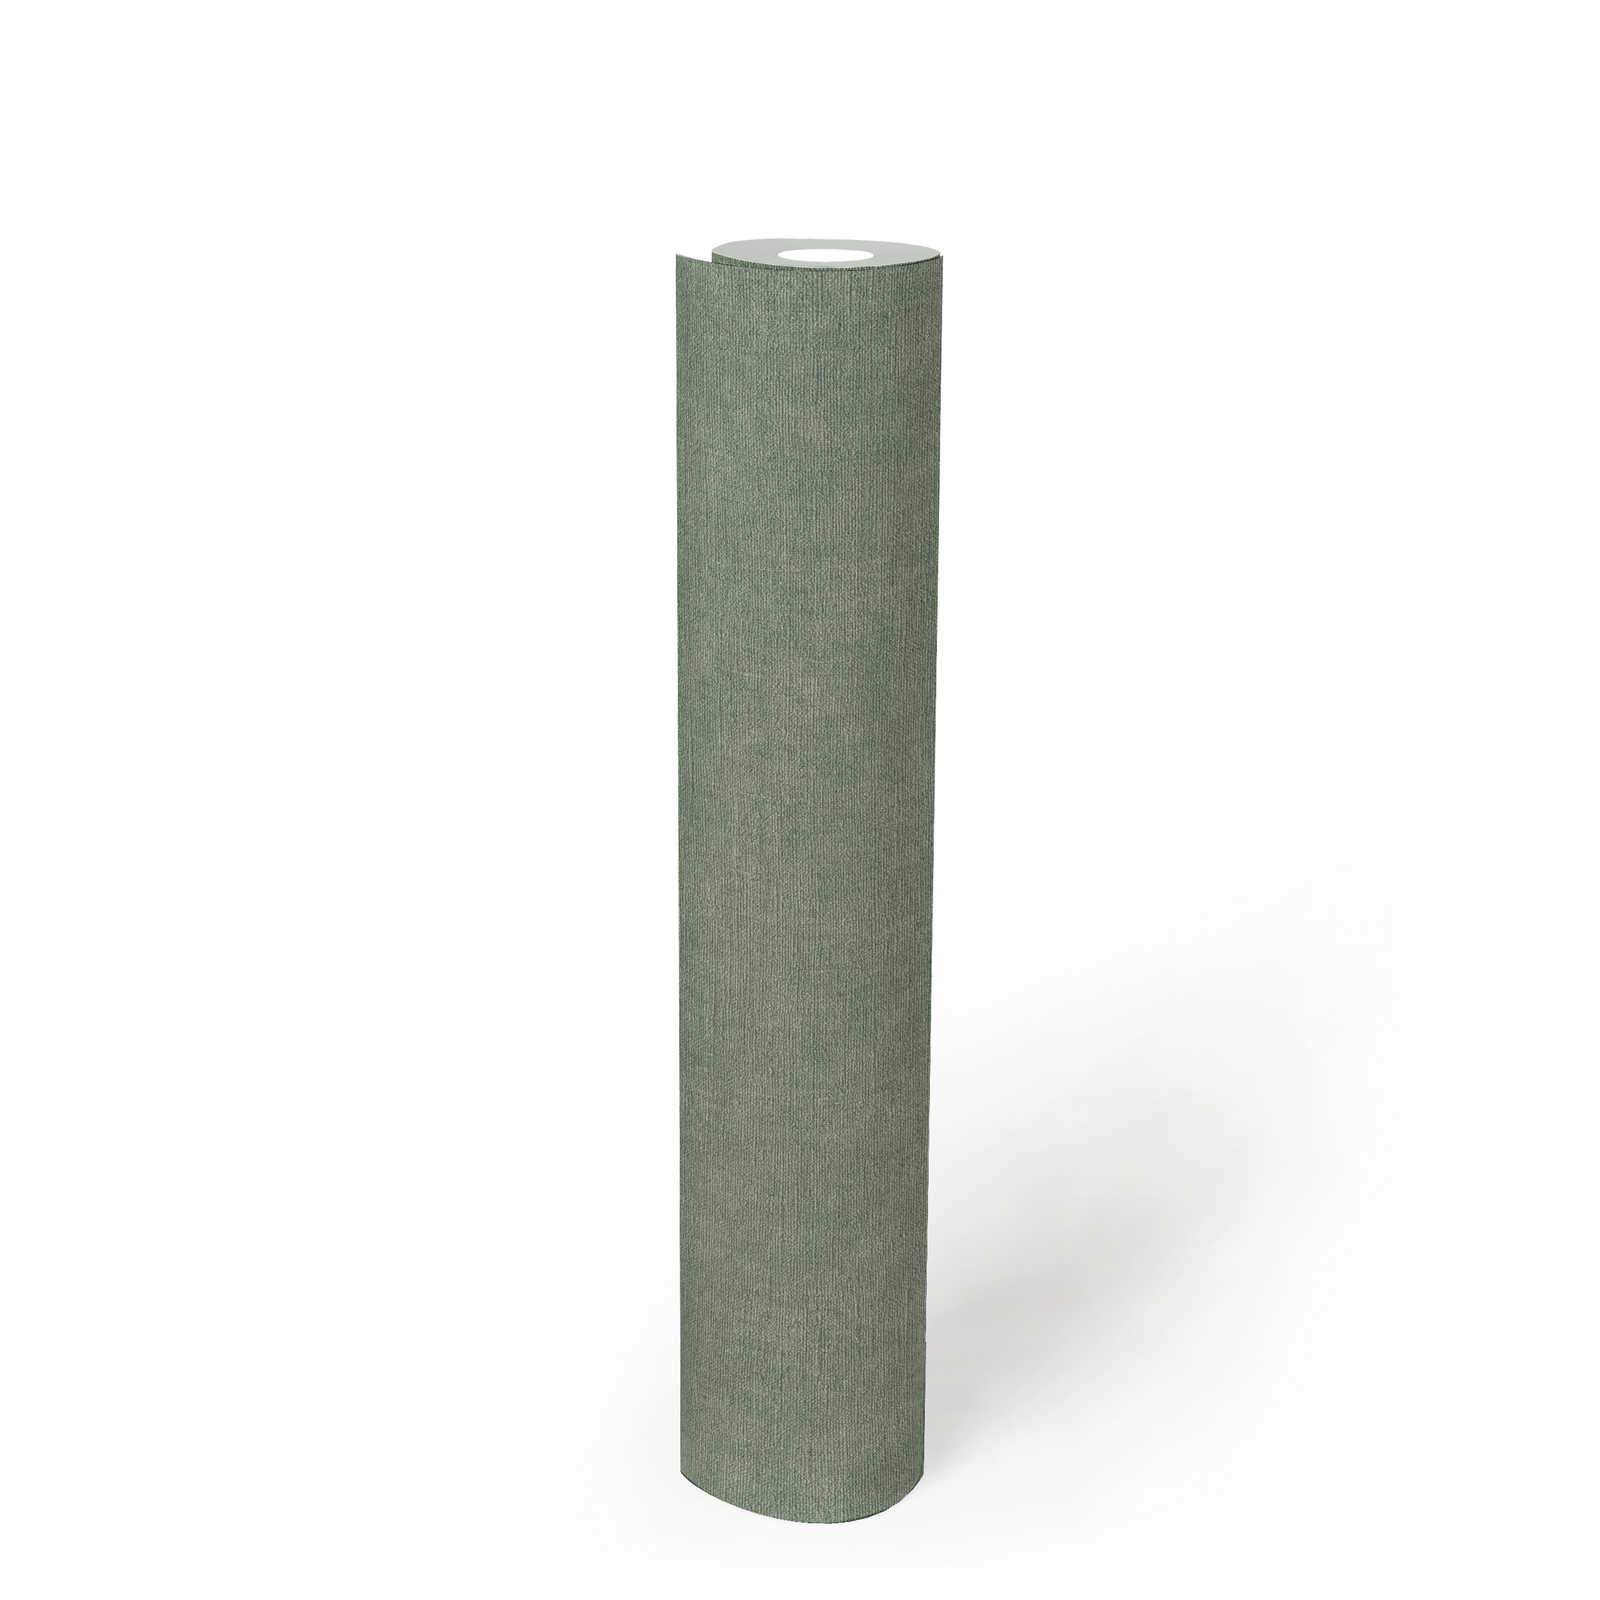             Lightly textured plain wallpaper in textile look - green, grey
        